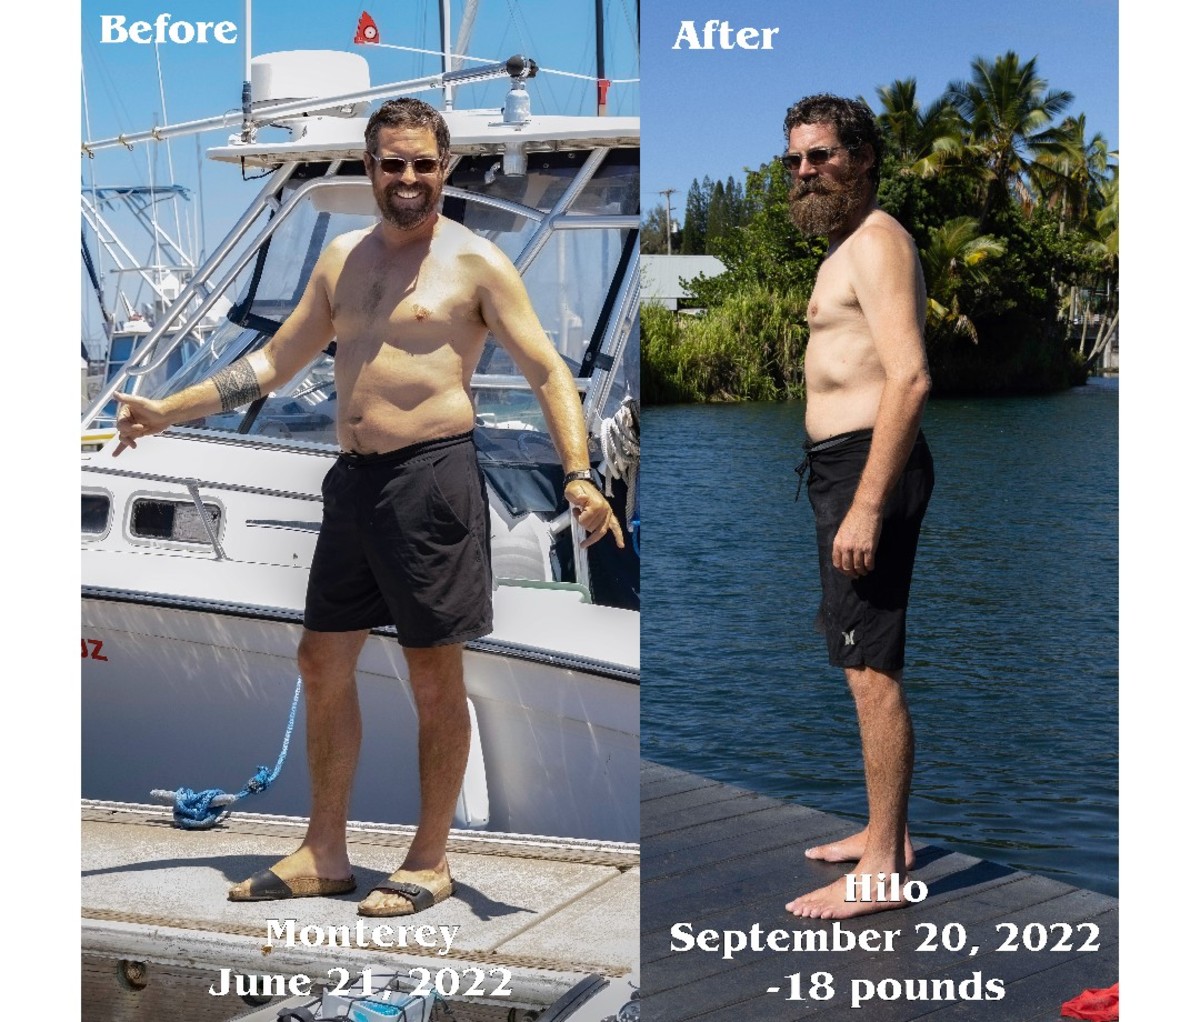 Cyril Derreumaux, shirtless before and after images during journey.